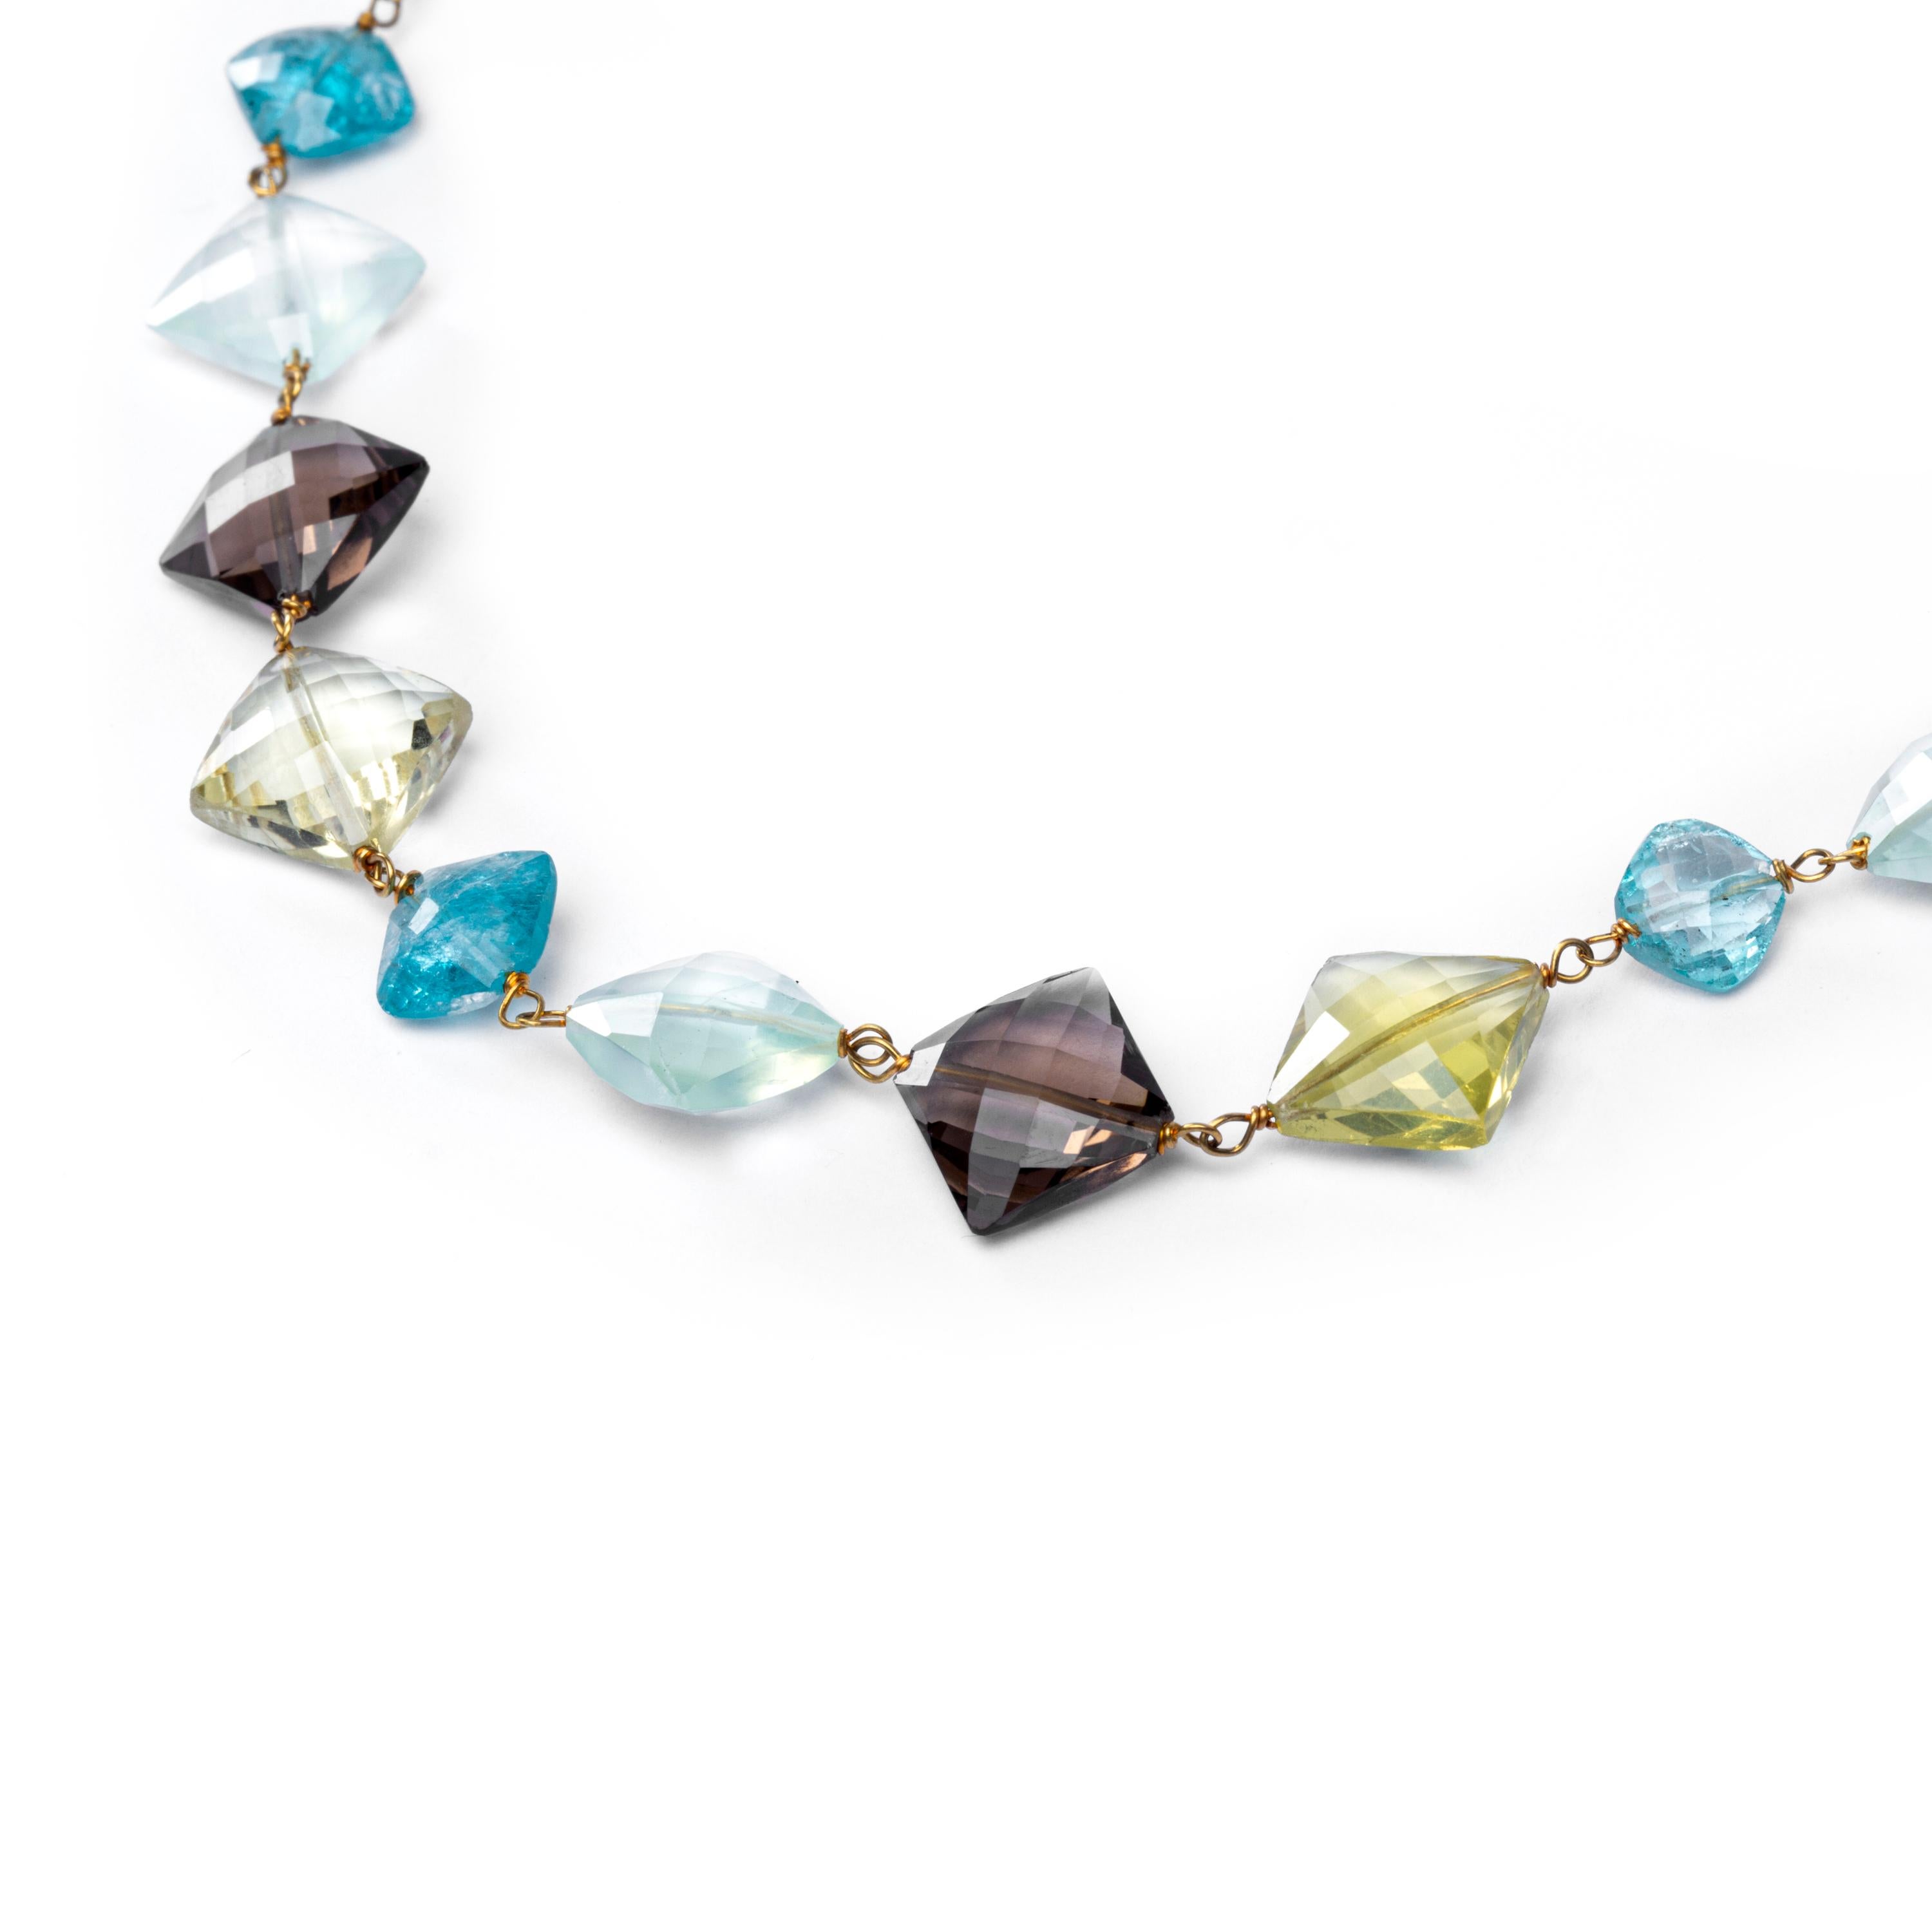 Alex Jona design collection, hand crafted in Italy, 18 karat yellow gold mounted necklace featuring 90 carats of citrine, grey quartz, rock crystal and apatite.
Dimensions: W x 1.7 cm, L x 44.5 cm - W x 0.66 in, L x 17.51 in.

Alex Jona jewels stand